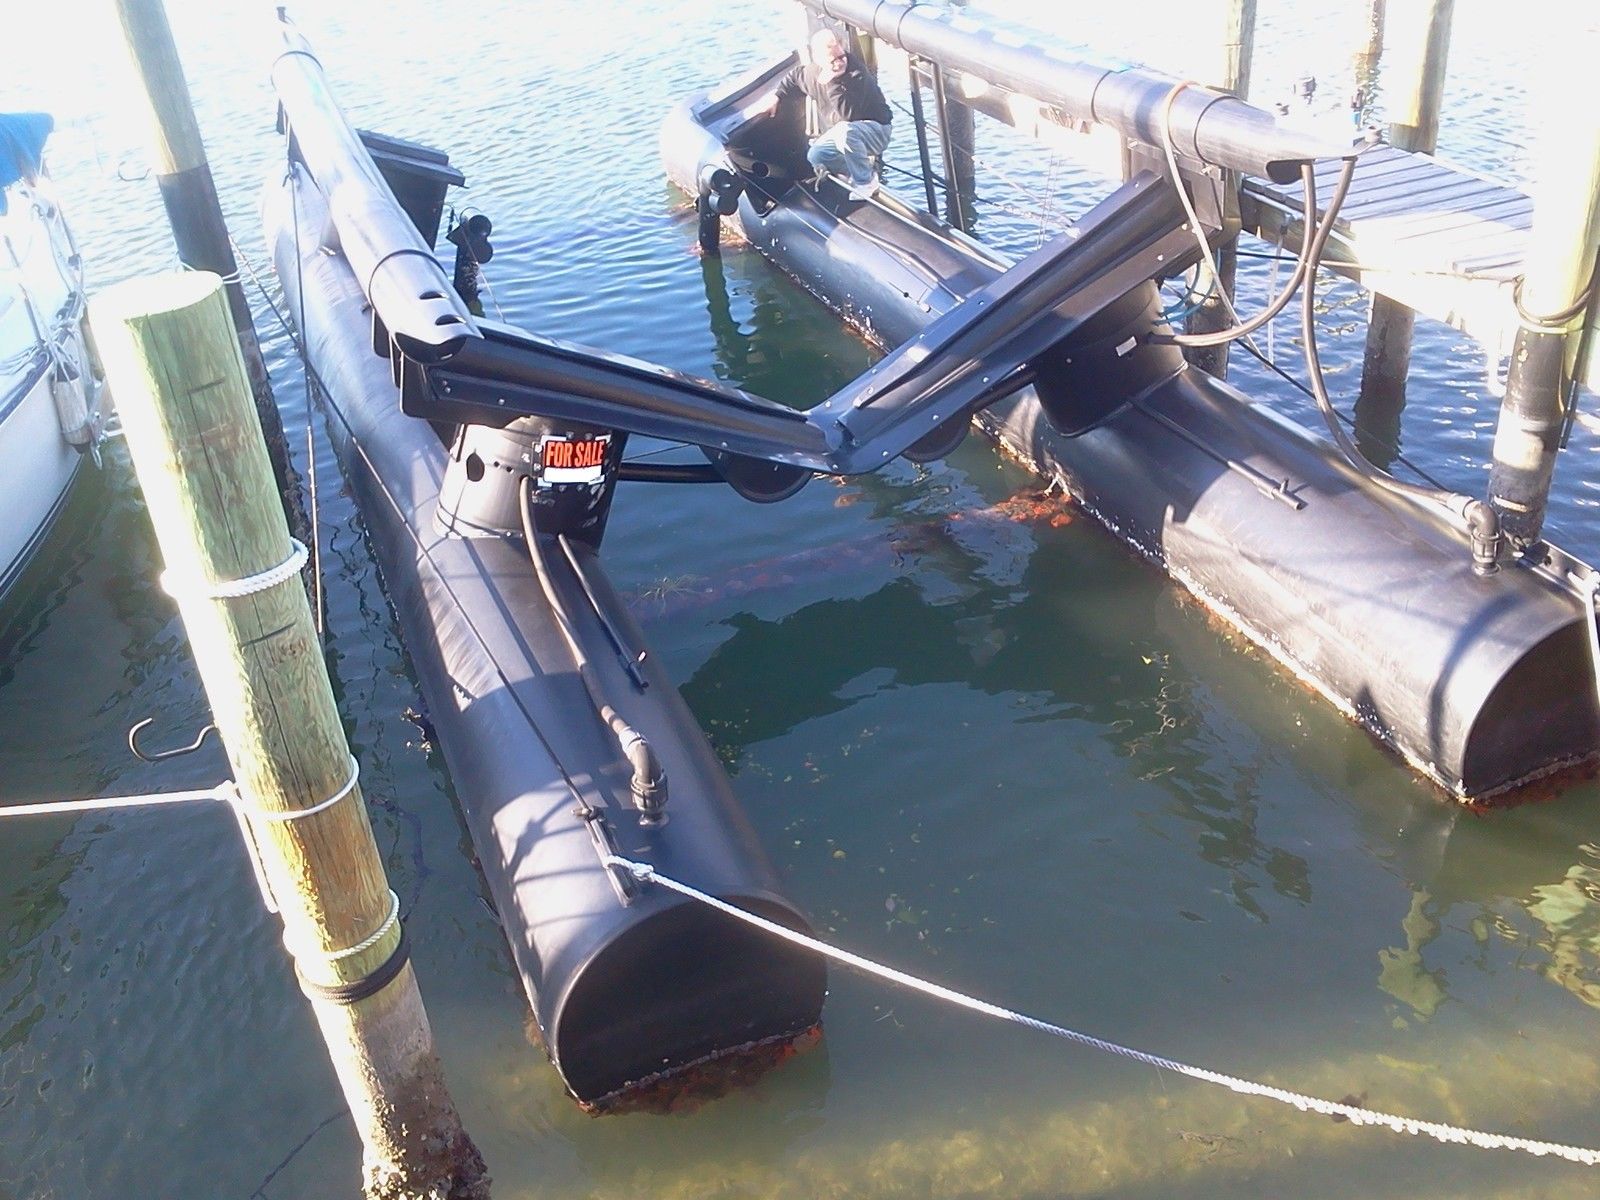 air berth floating boat lift 2006 for sale for $15,000